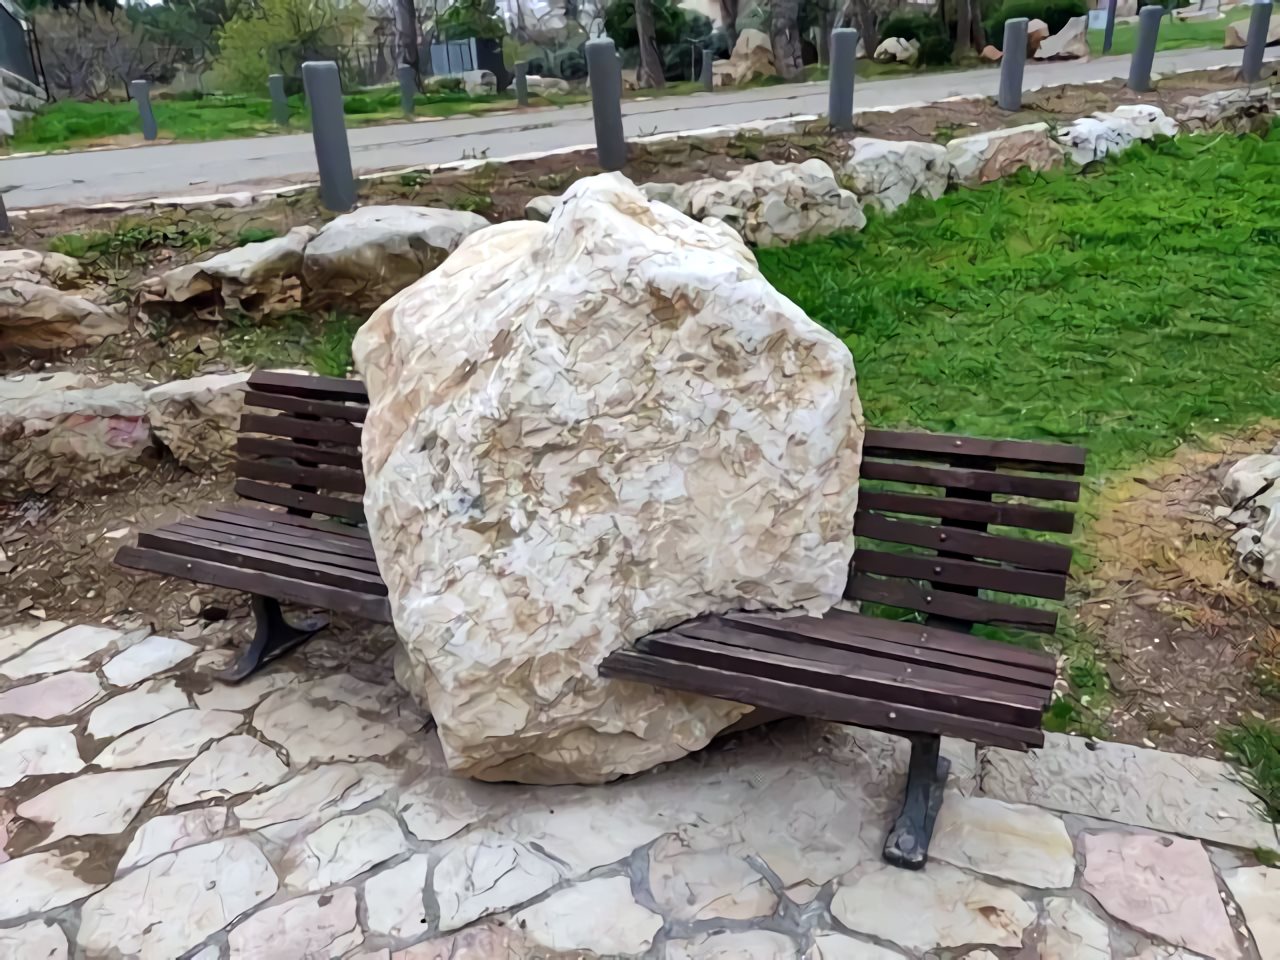 There are rocks. There are benches. This is a rock bench